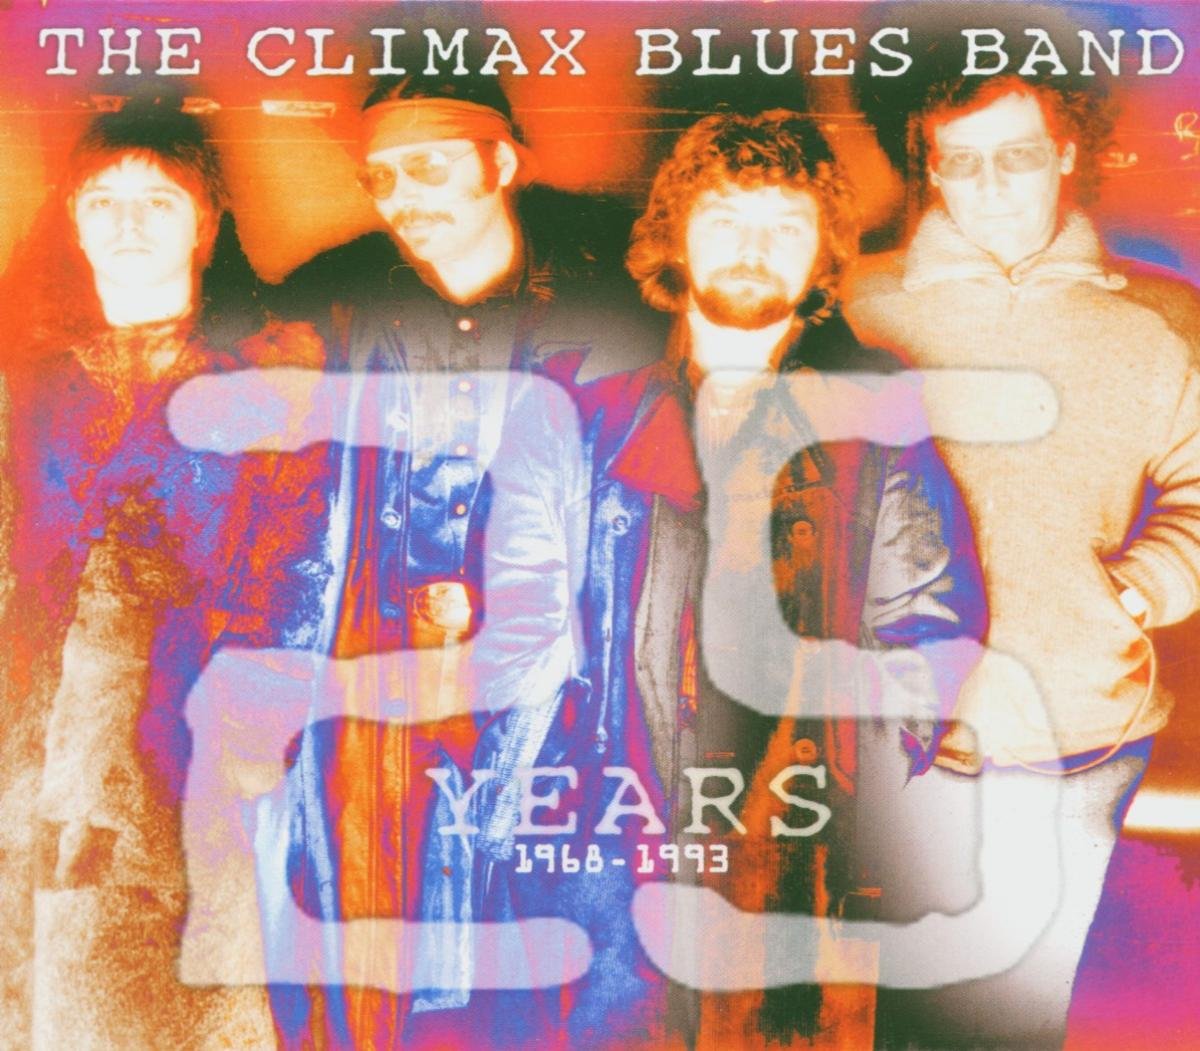 The Climax Blues Band-25 Years 1968-1993-2CD-FLAC-1994-6DM